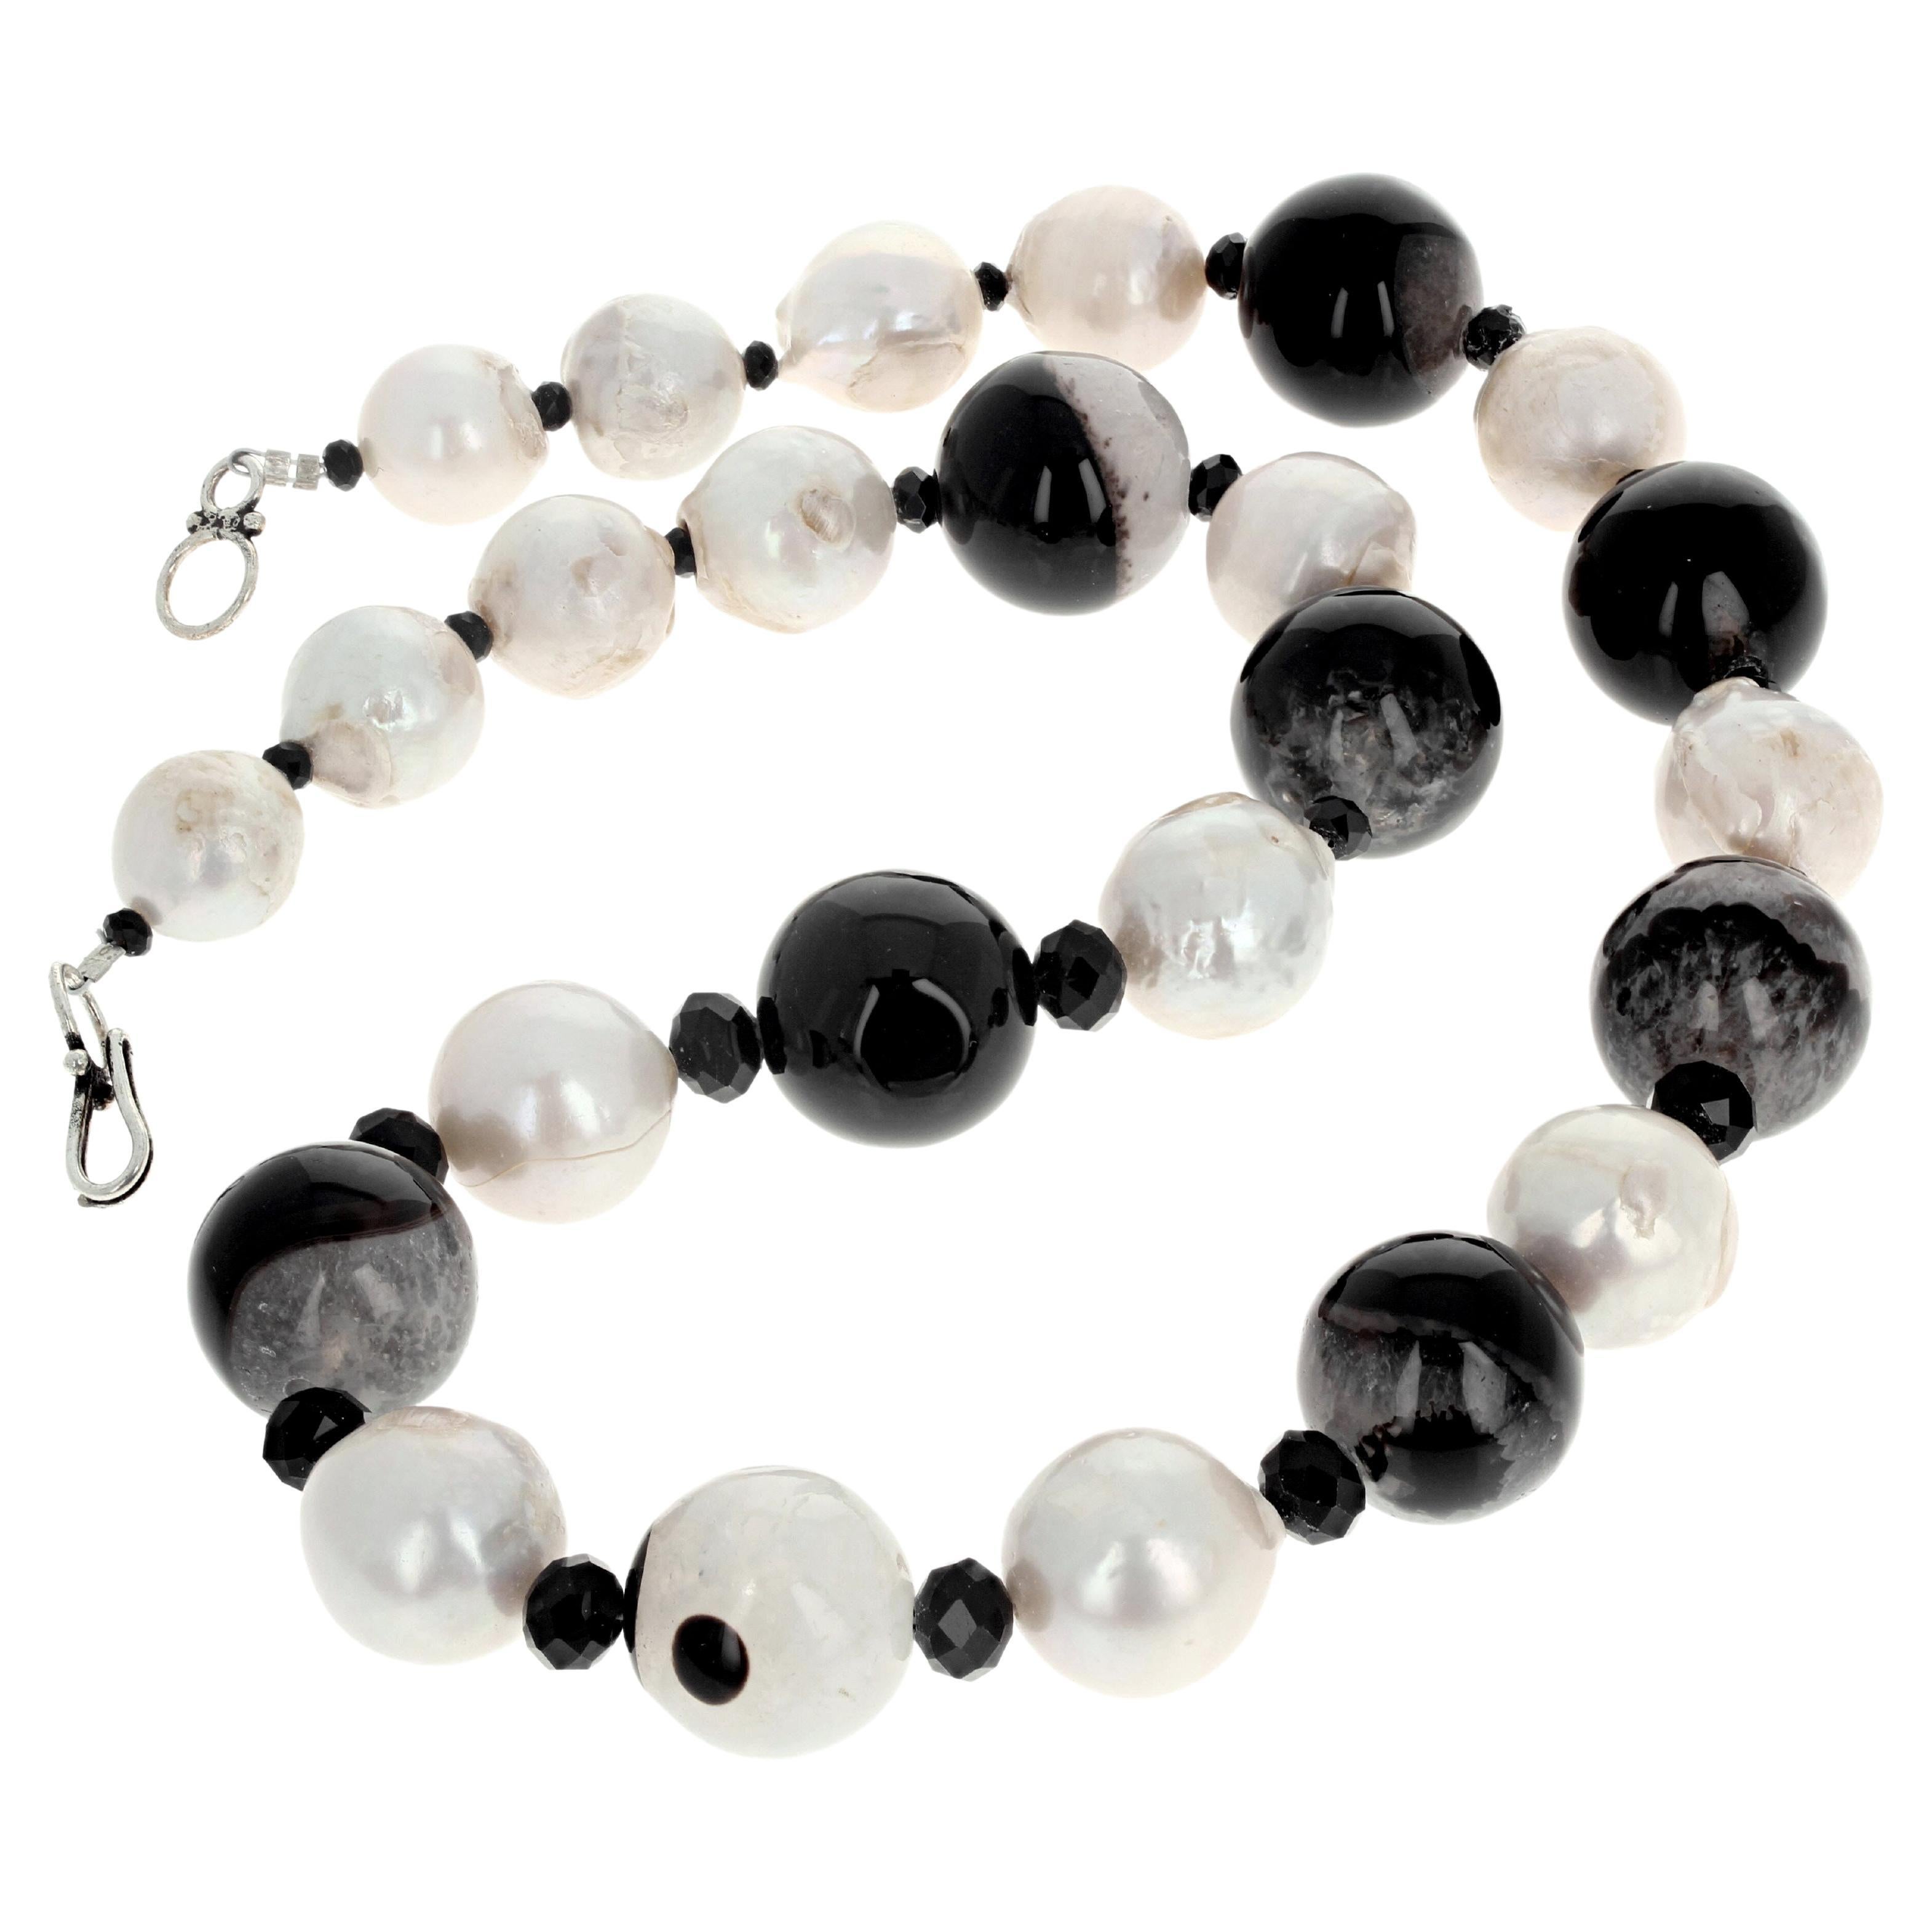 AJD Beautiful Natural Fresh Water White Pearls & Natural Agate Necklace